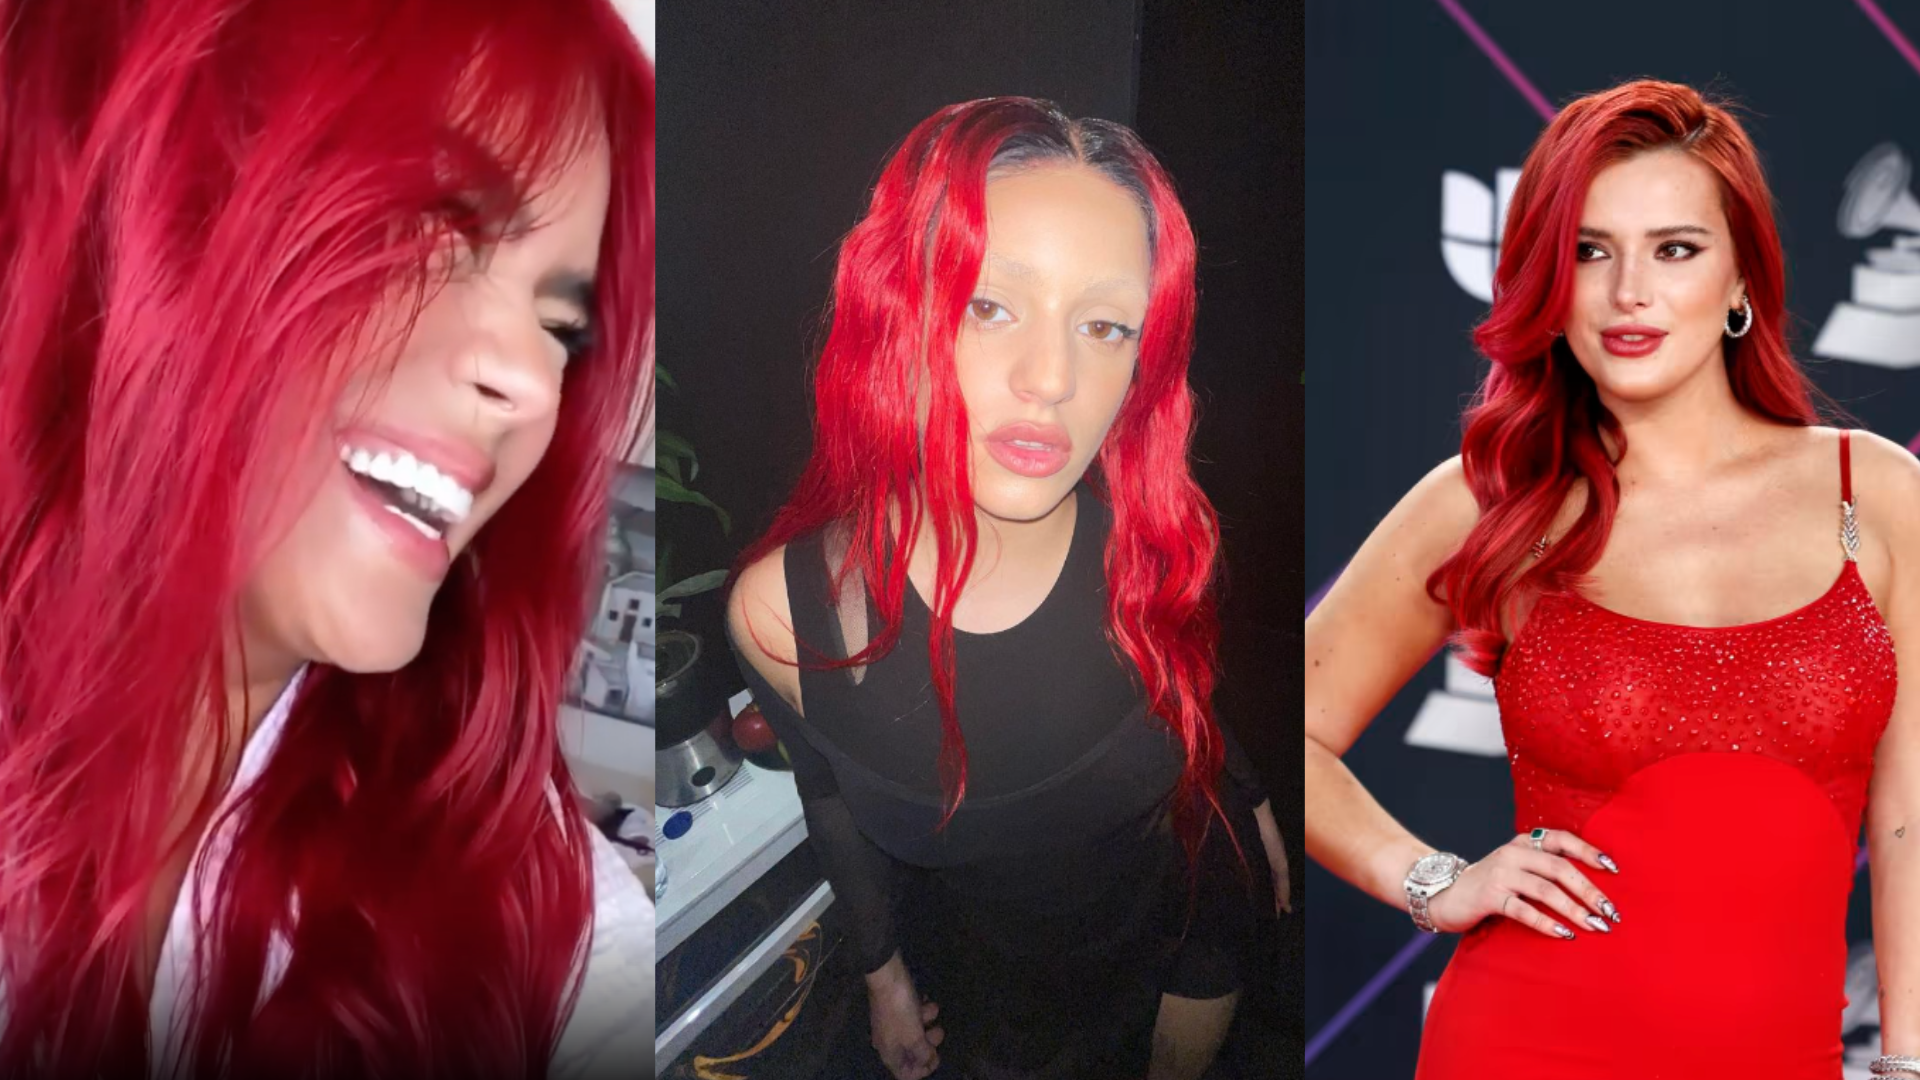 Celebs Are Dyeing Their Hair Siren Red Like “The Little Mermaid” And It’s Okay